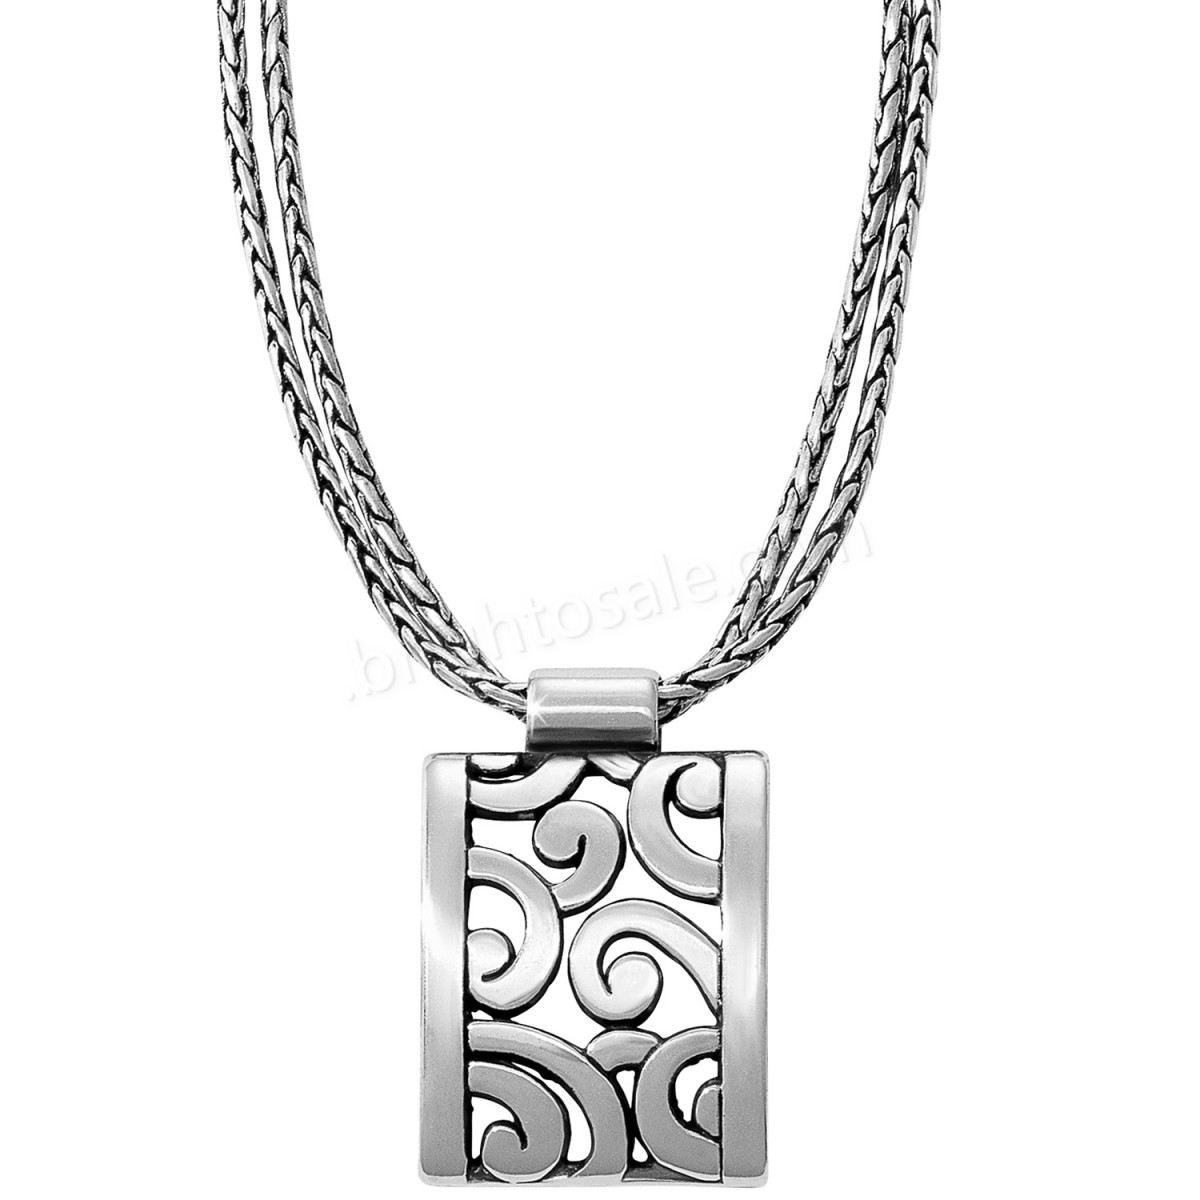 Brighton Collectibles & Online Discount London Groove Arc Necklace - -0